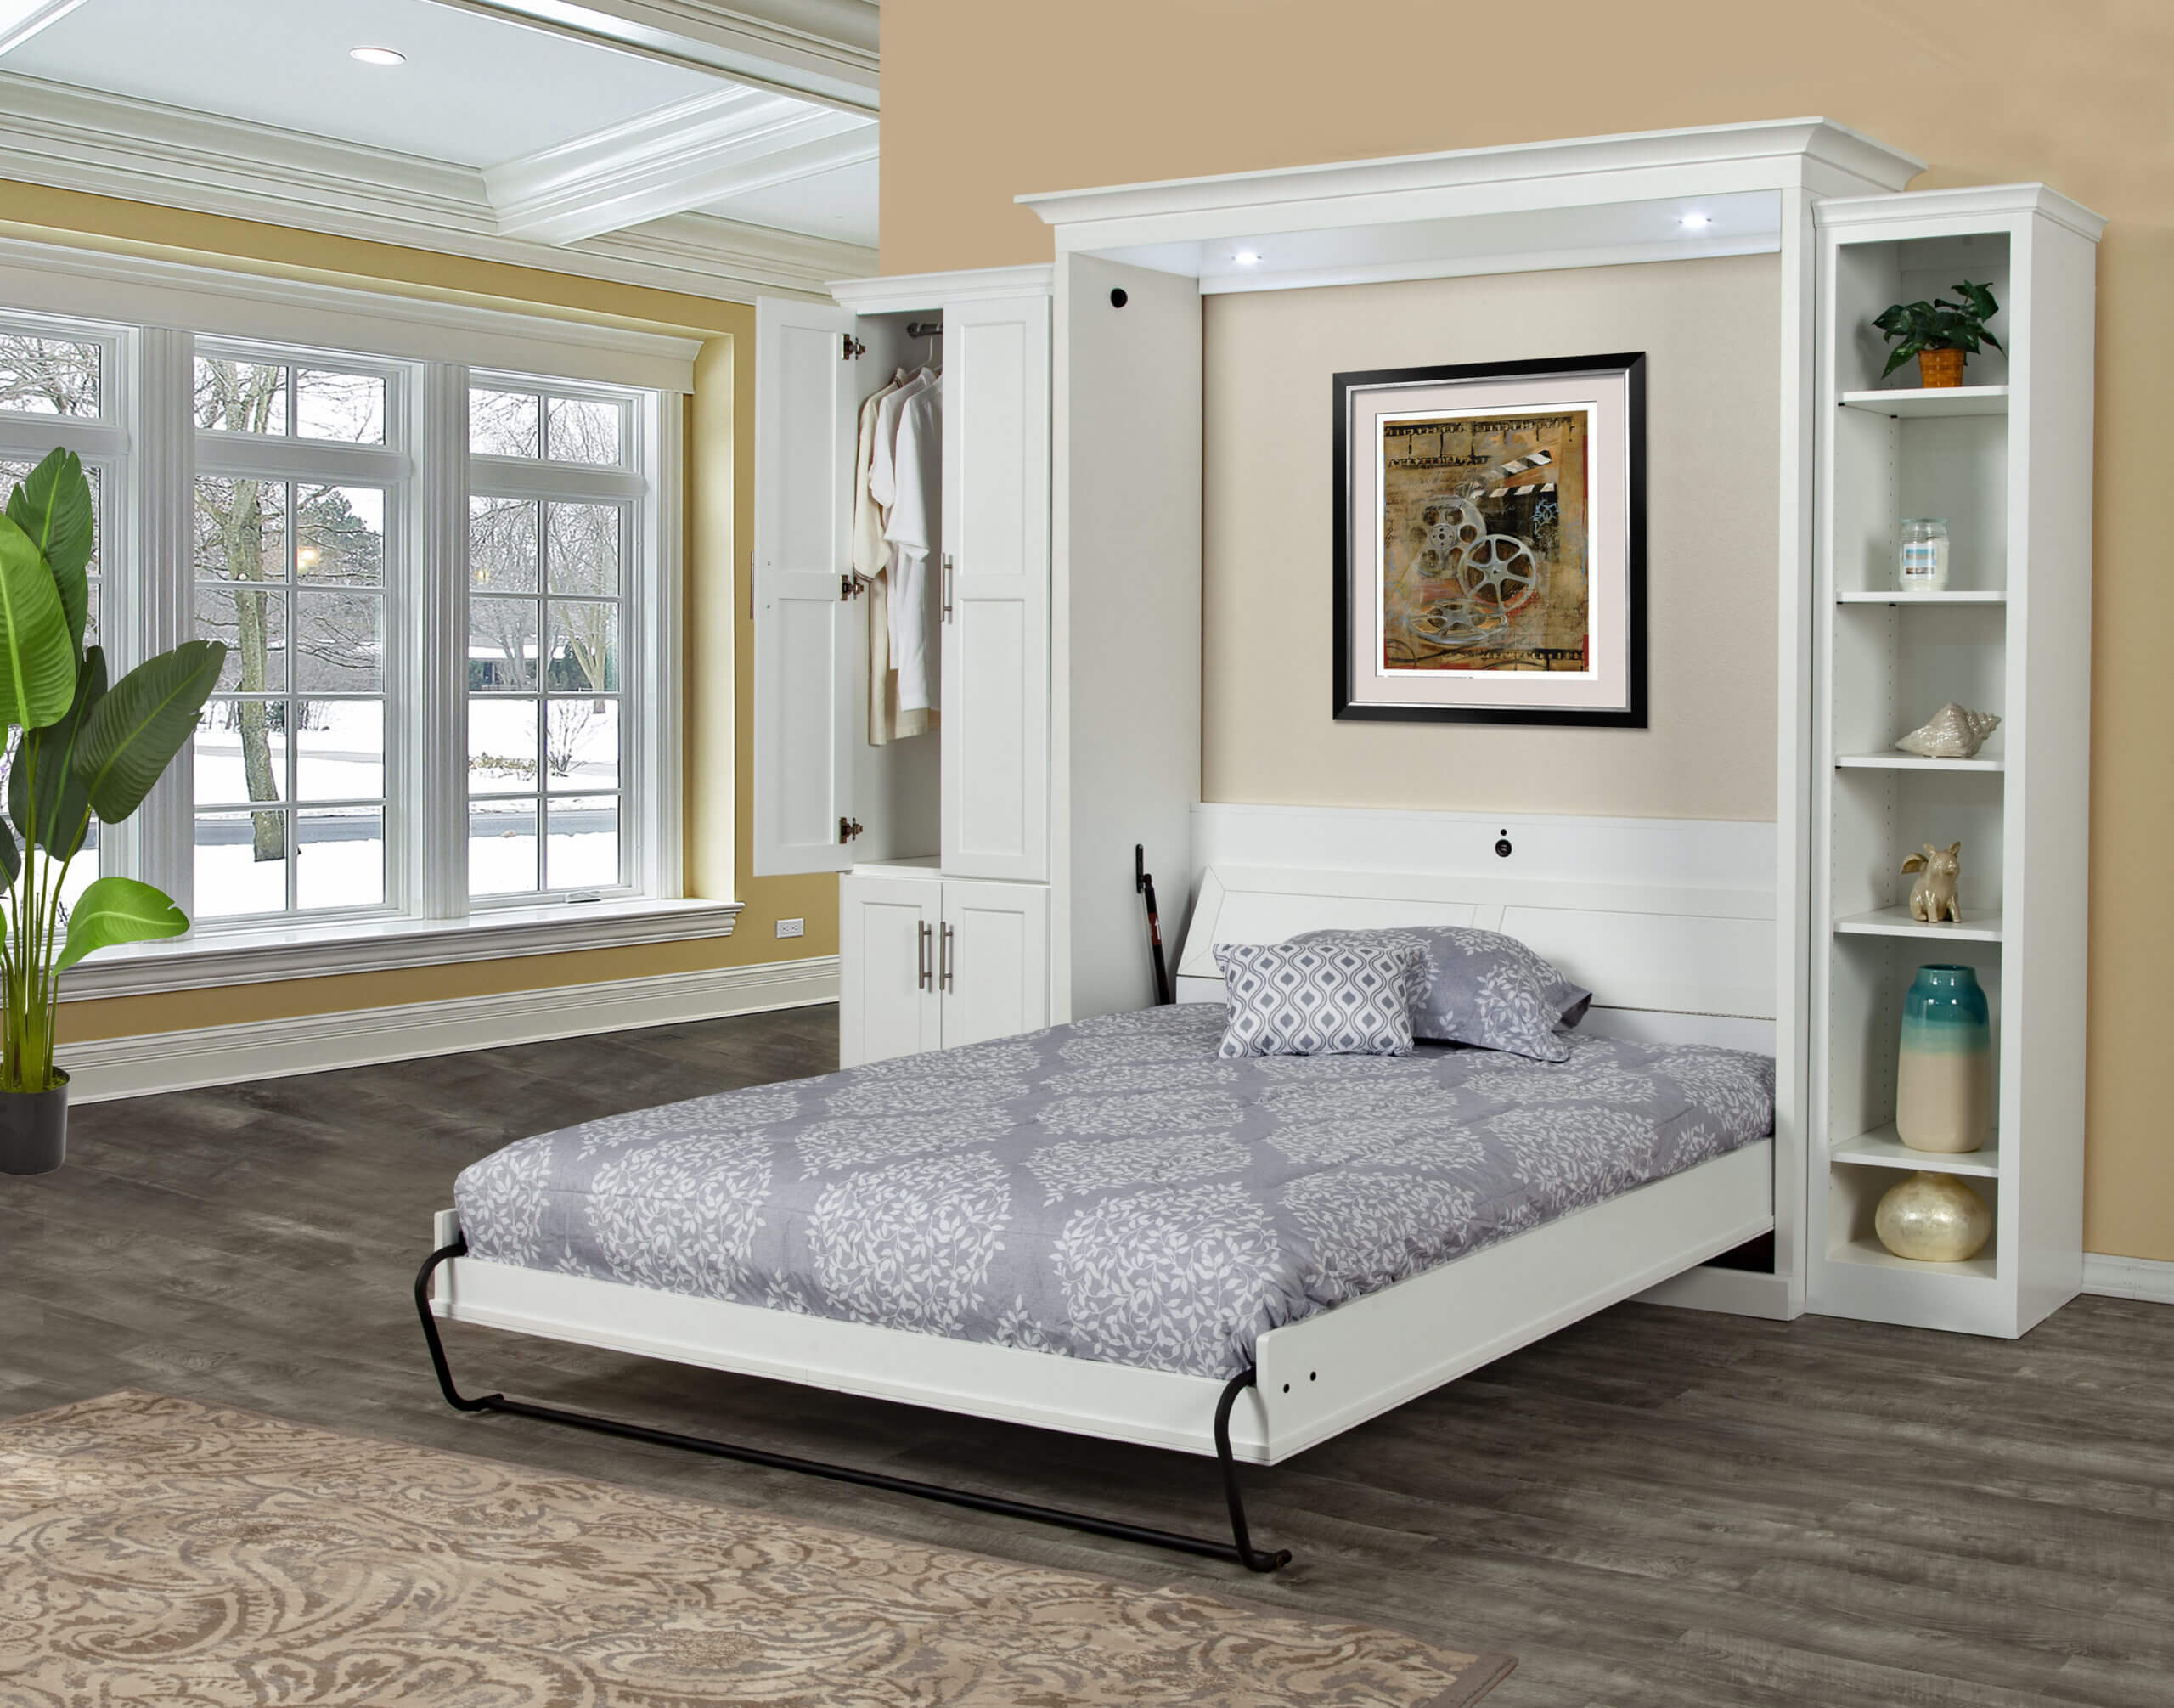 Wall Beds | Wallbeds n More Campbell | Silicon Valley Muphy Beds